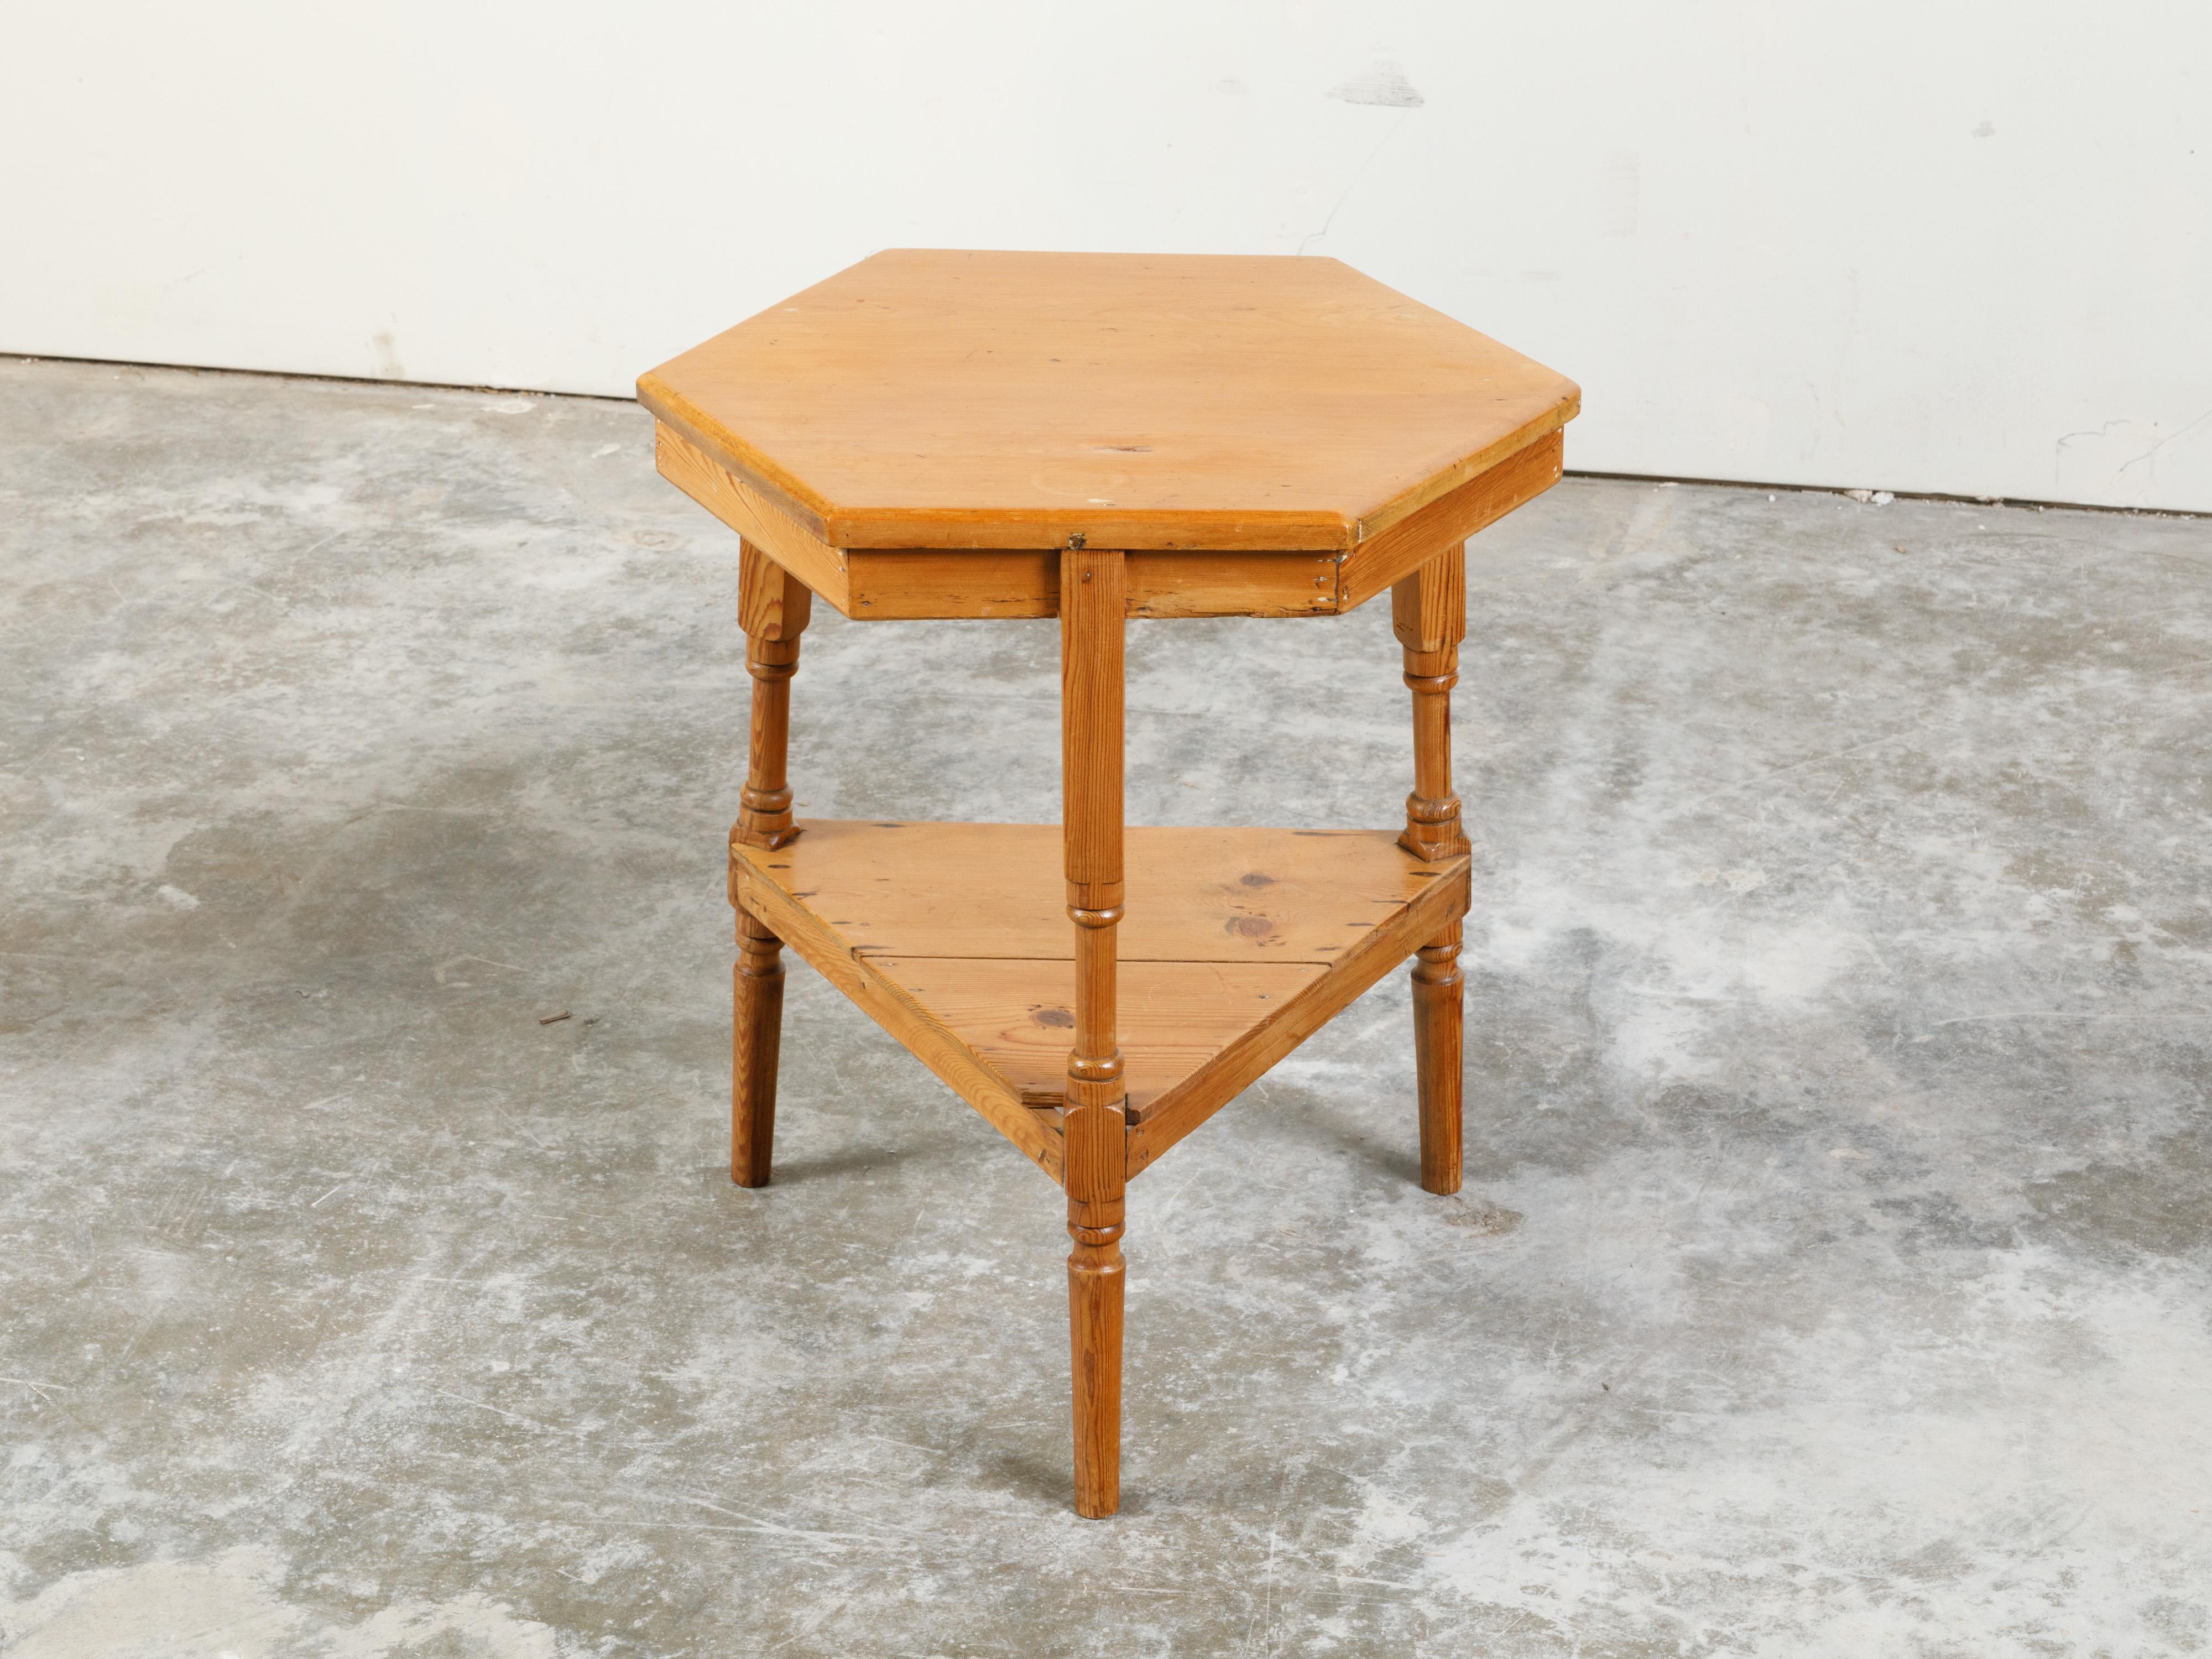 20th Century English Midcentury Pine Cricket Table with Hexagonal Top and Triangular Shelf For Sale